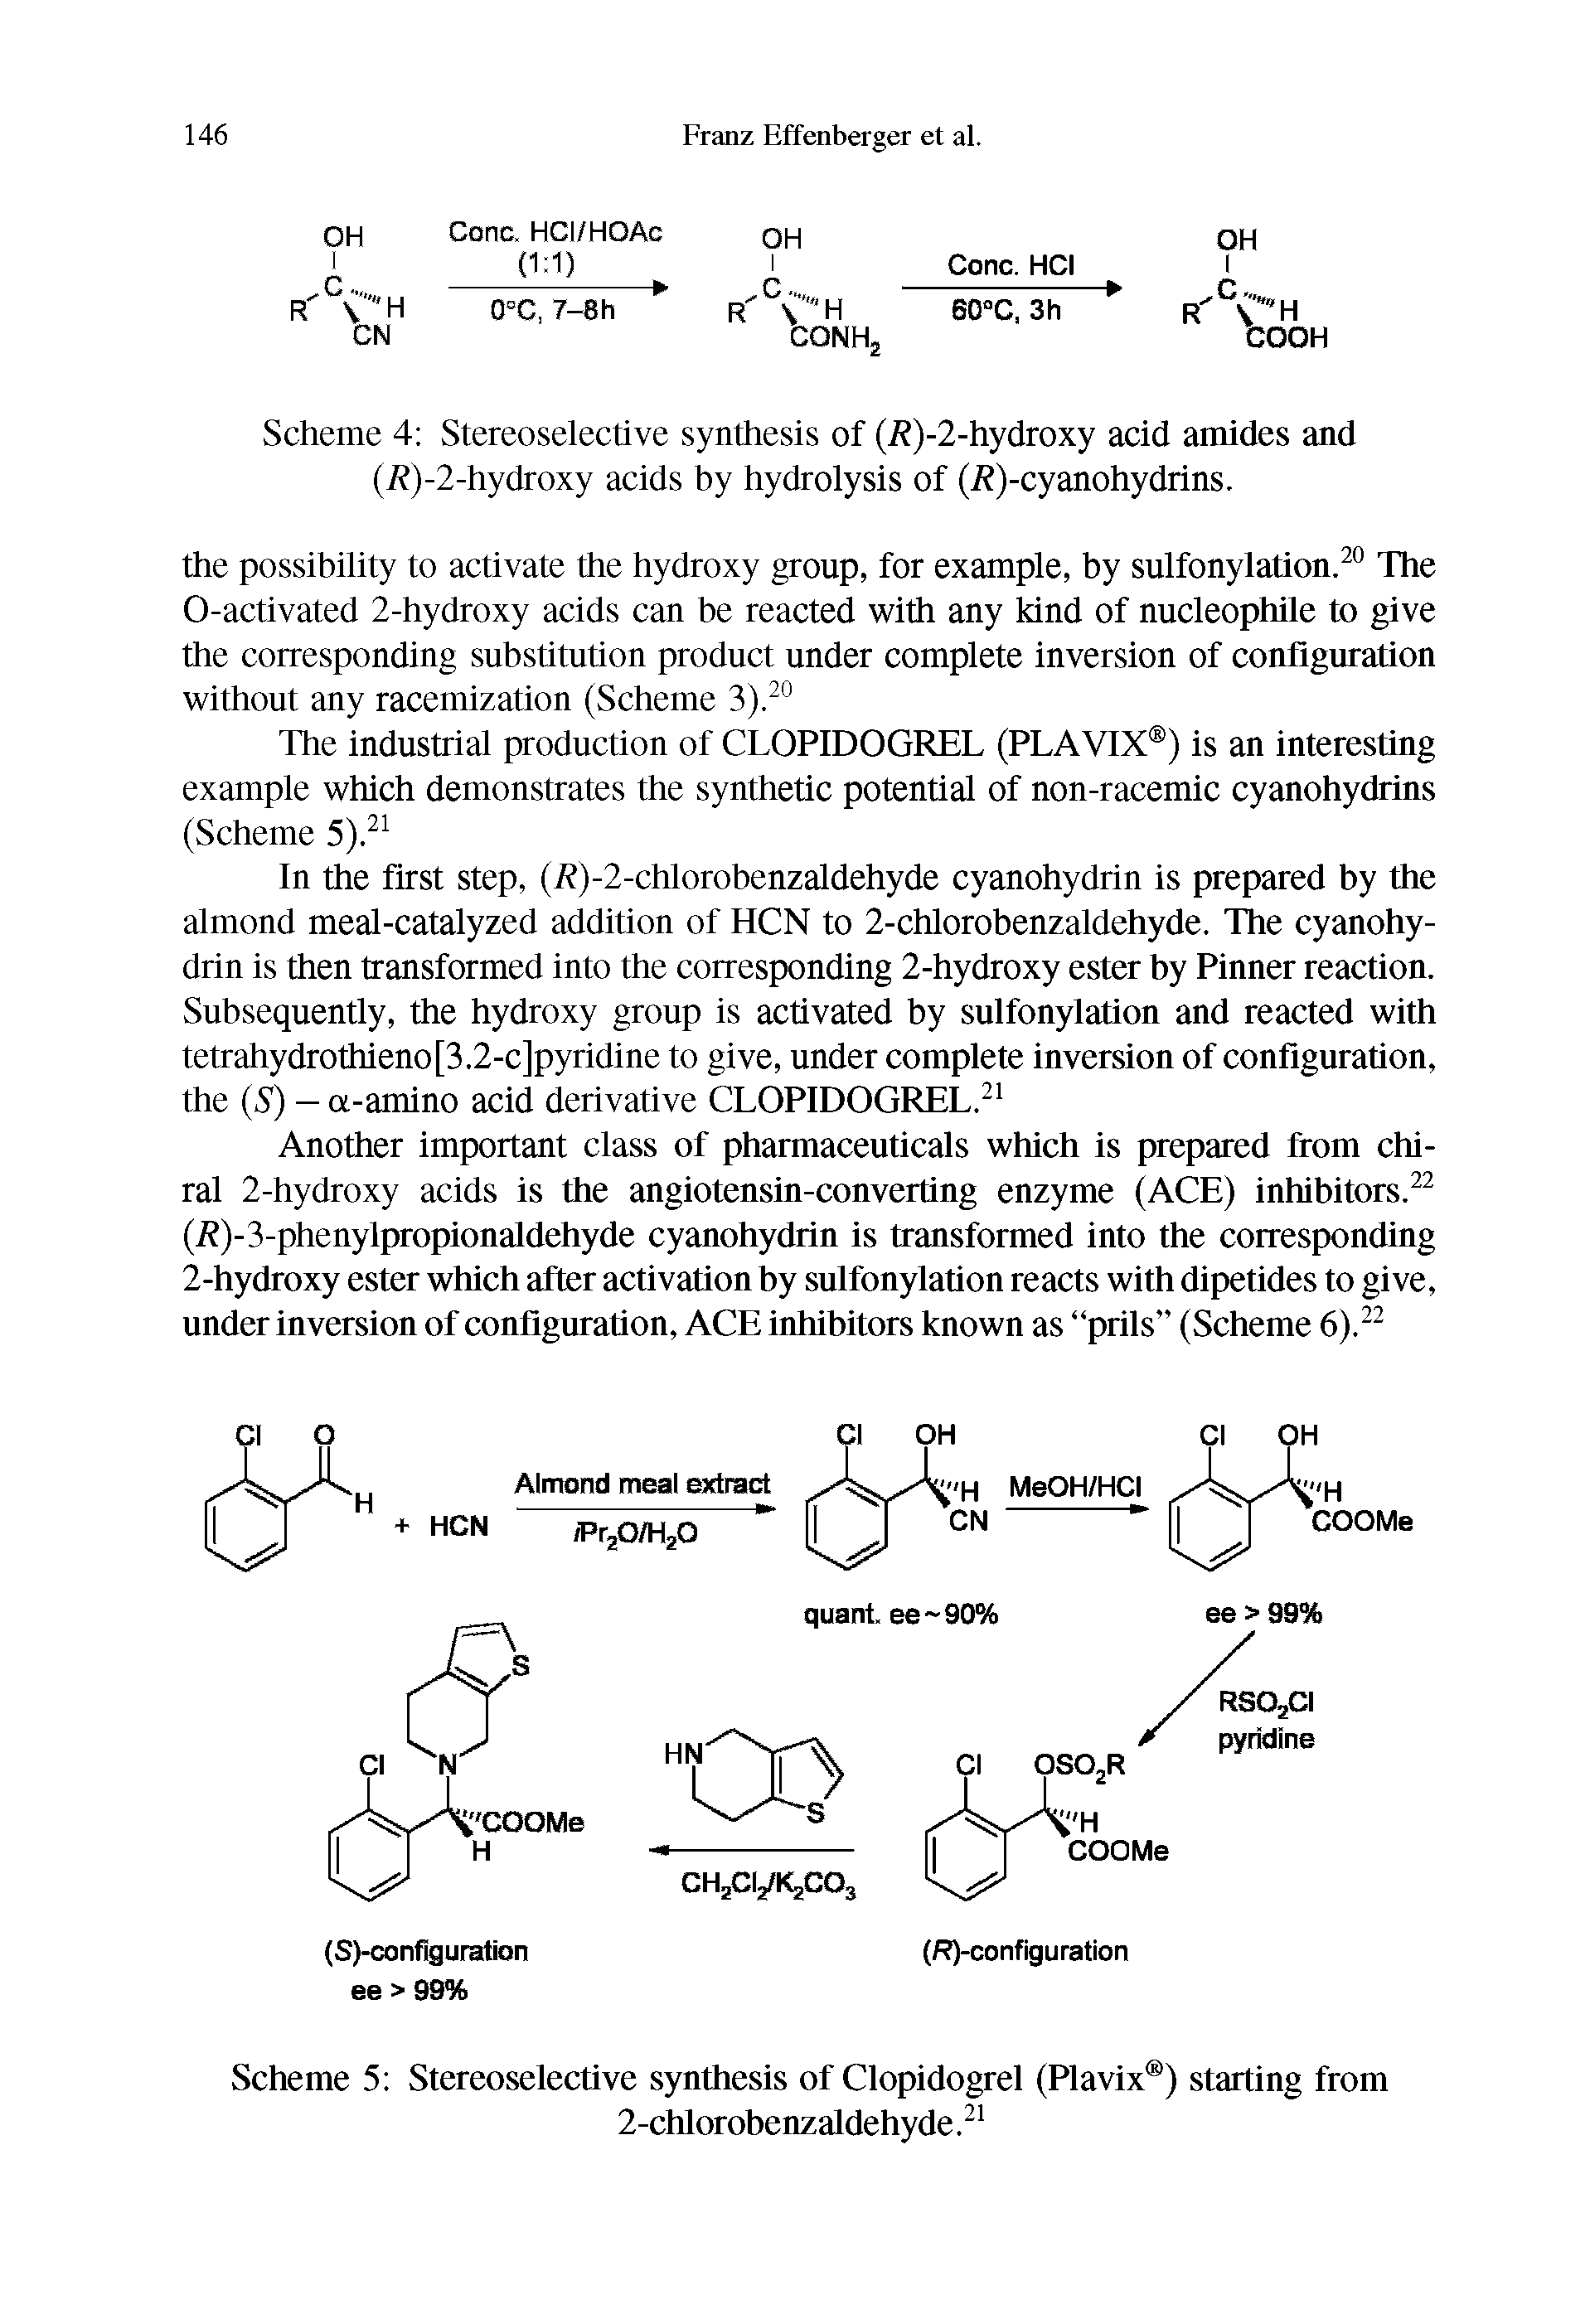 Scheme 4 Stereoselective synthesis of (f )-2-hydroxy acid amides and (7 )-2-hydroxy acids hy hydrolysis of (f )-cyanohydrins.